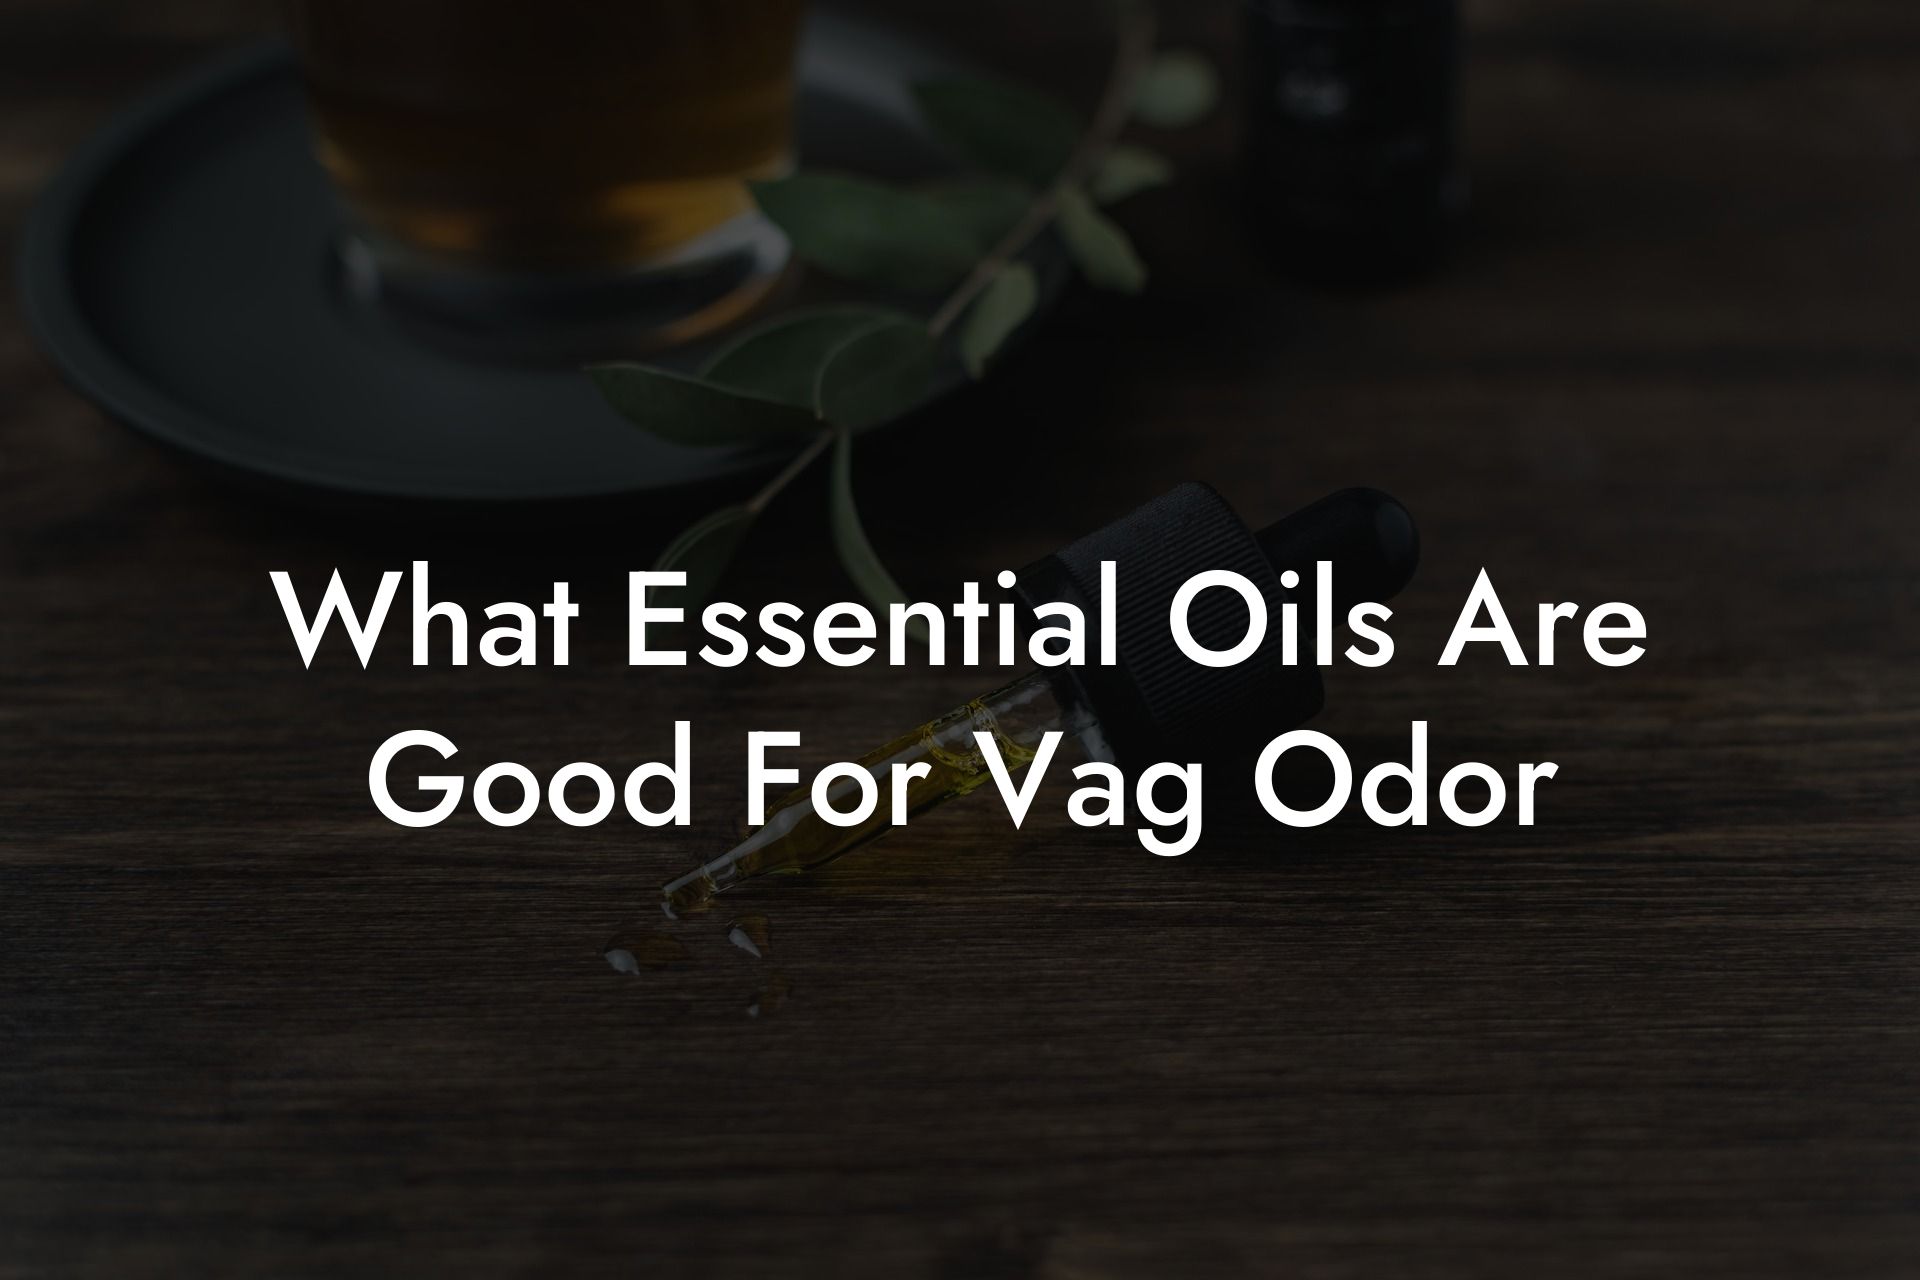 What Essential Oils Are Good For Vag Odor